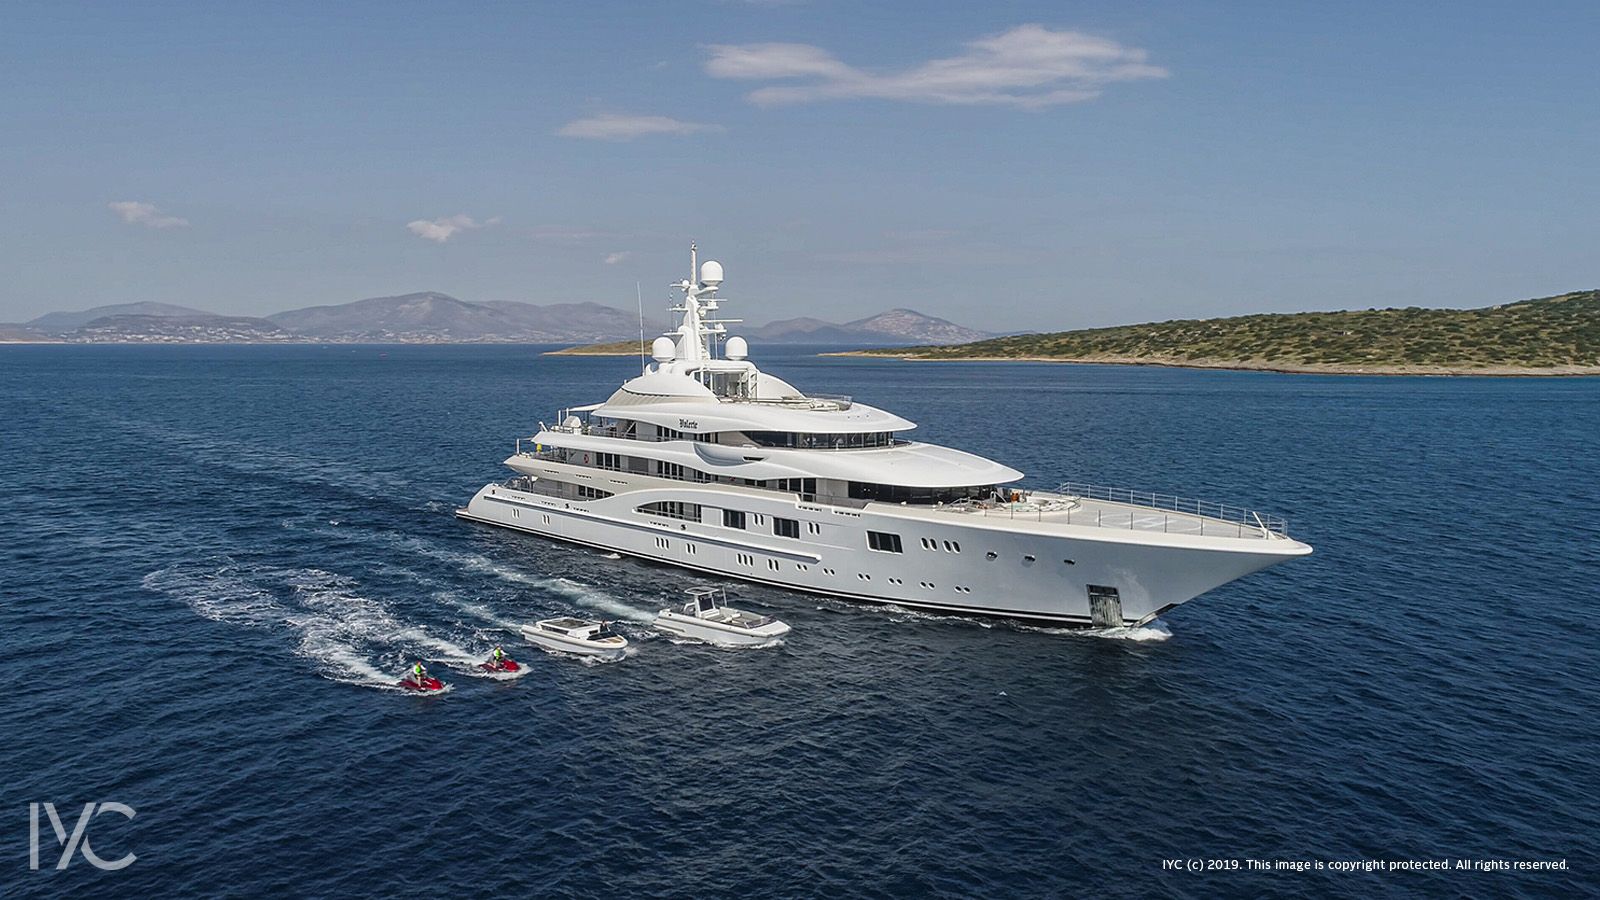 Haiku escort Slager 60m and more Luxury Yachts for Sale (196ft Yachts) - IYC